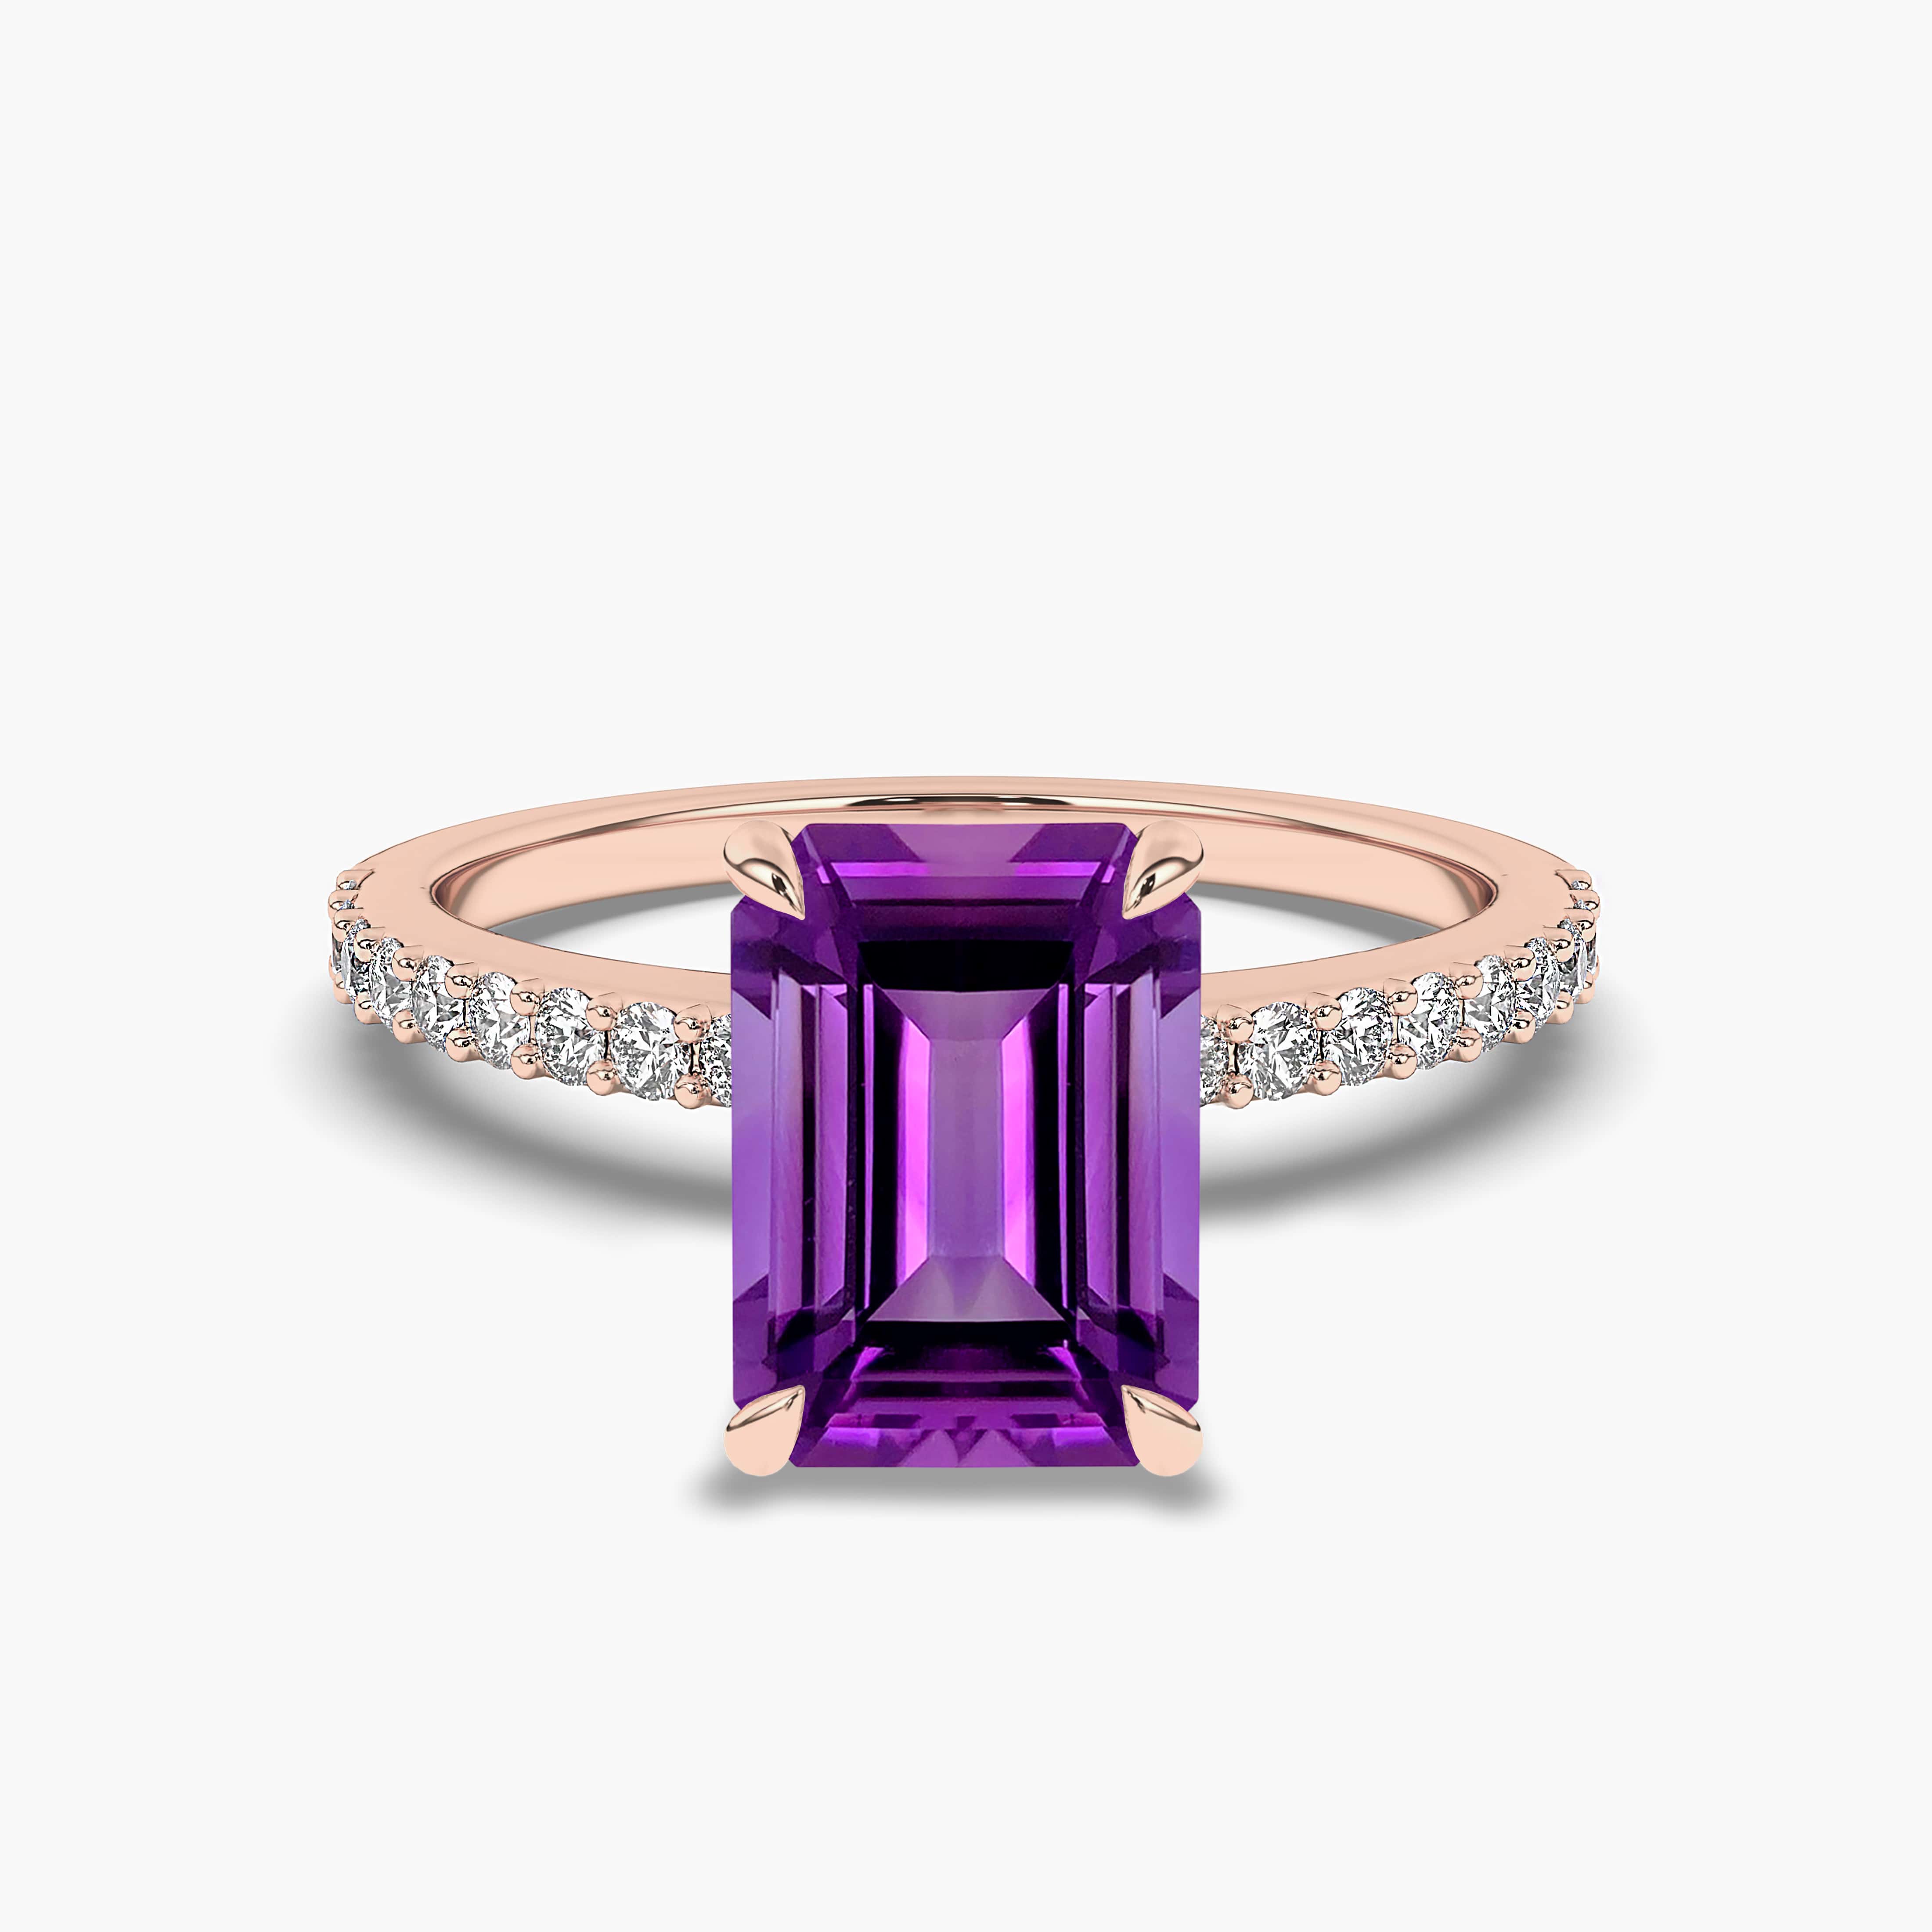 Emerald Cut Amethyst Ring Rose Gold Engagement Ring Unique Ring Setting Natural Diamond